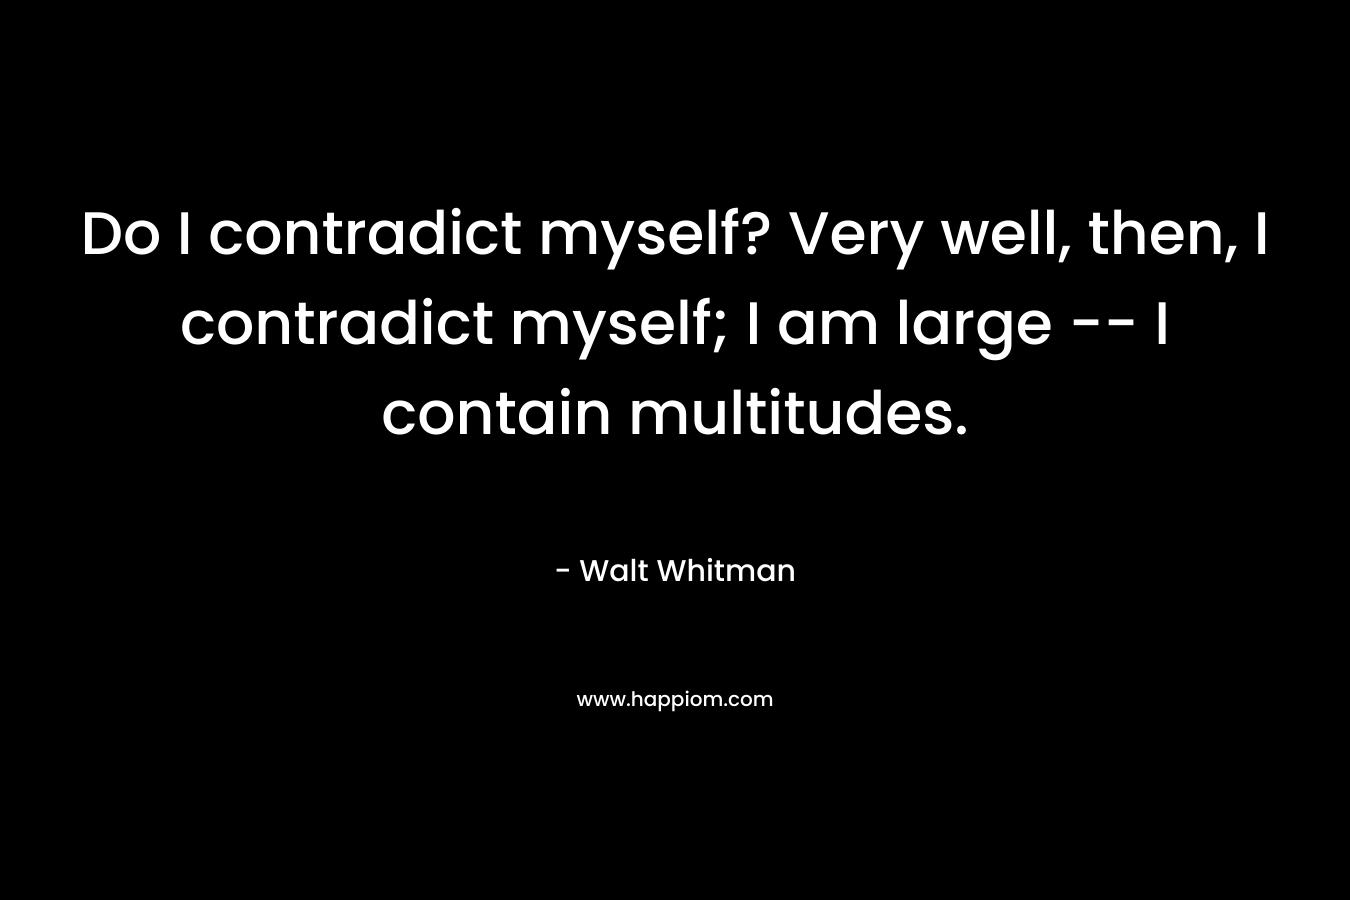 Do I contradict myself? Very well, then, I contradict myself; I am large -- I contain multitudes.